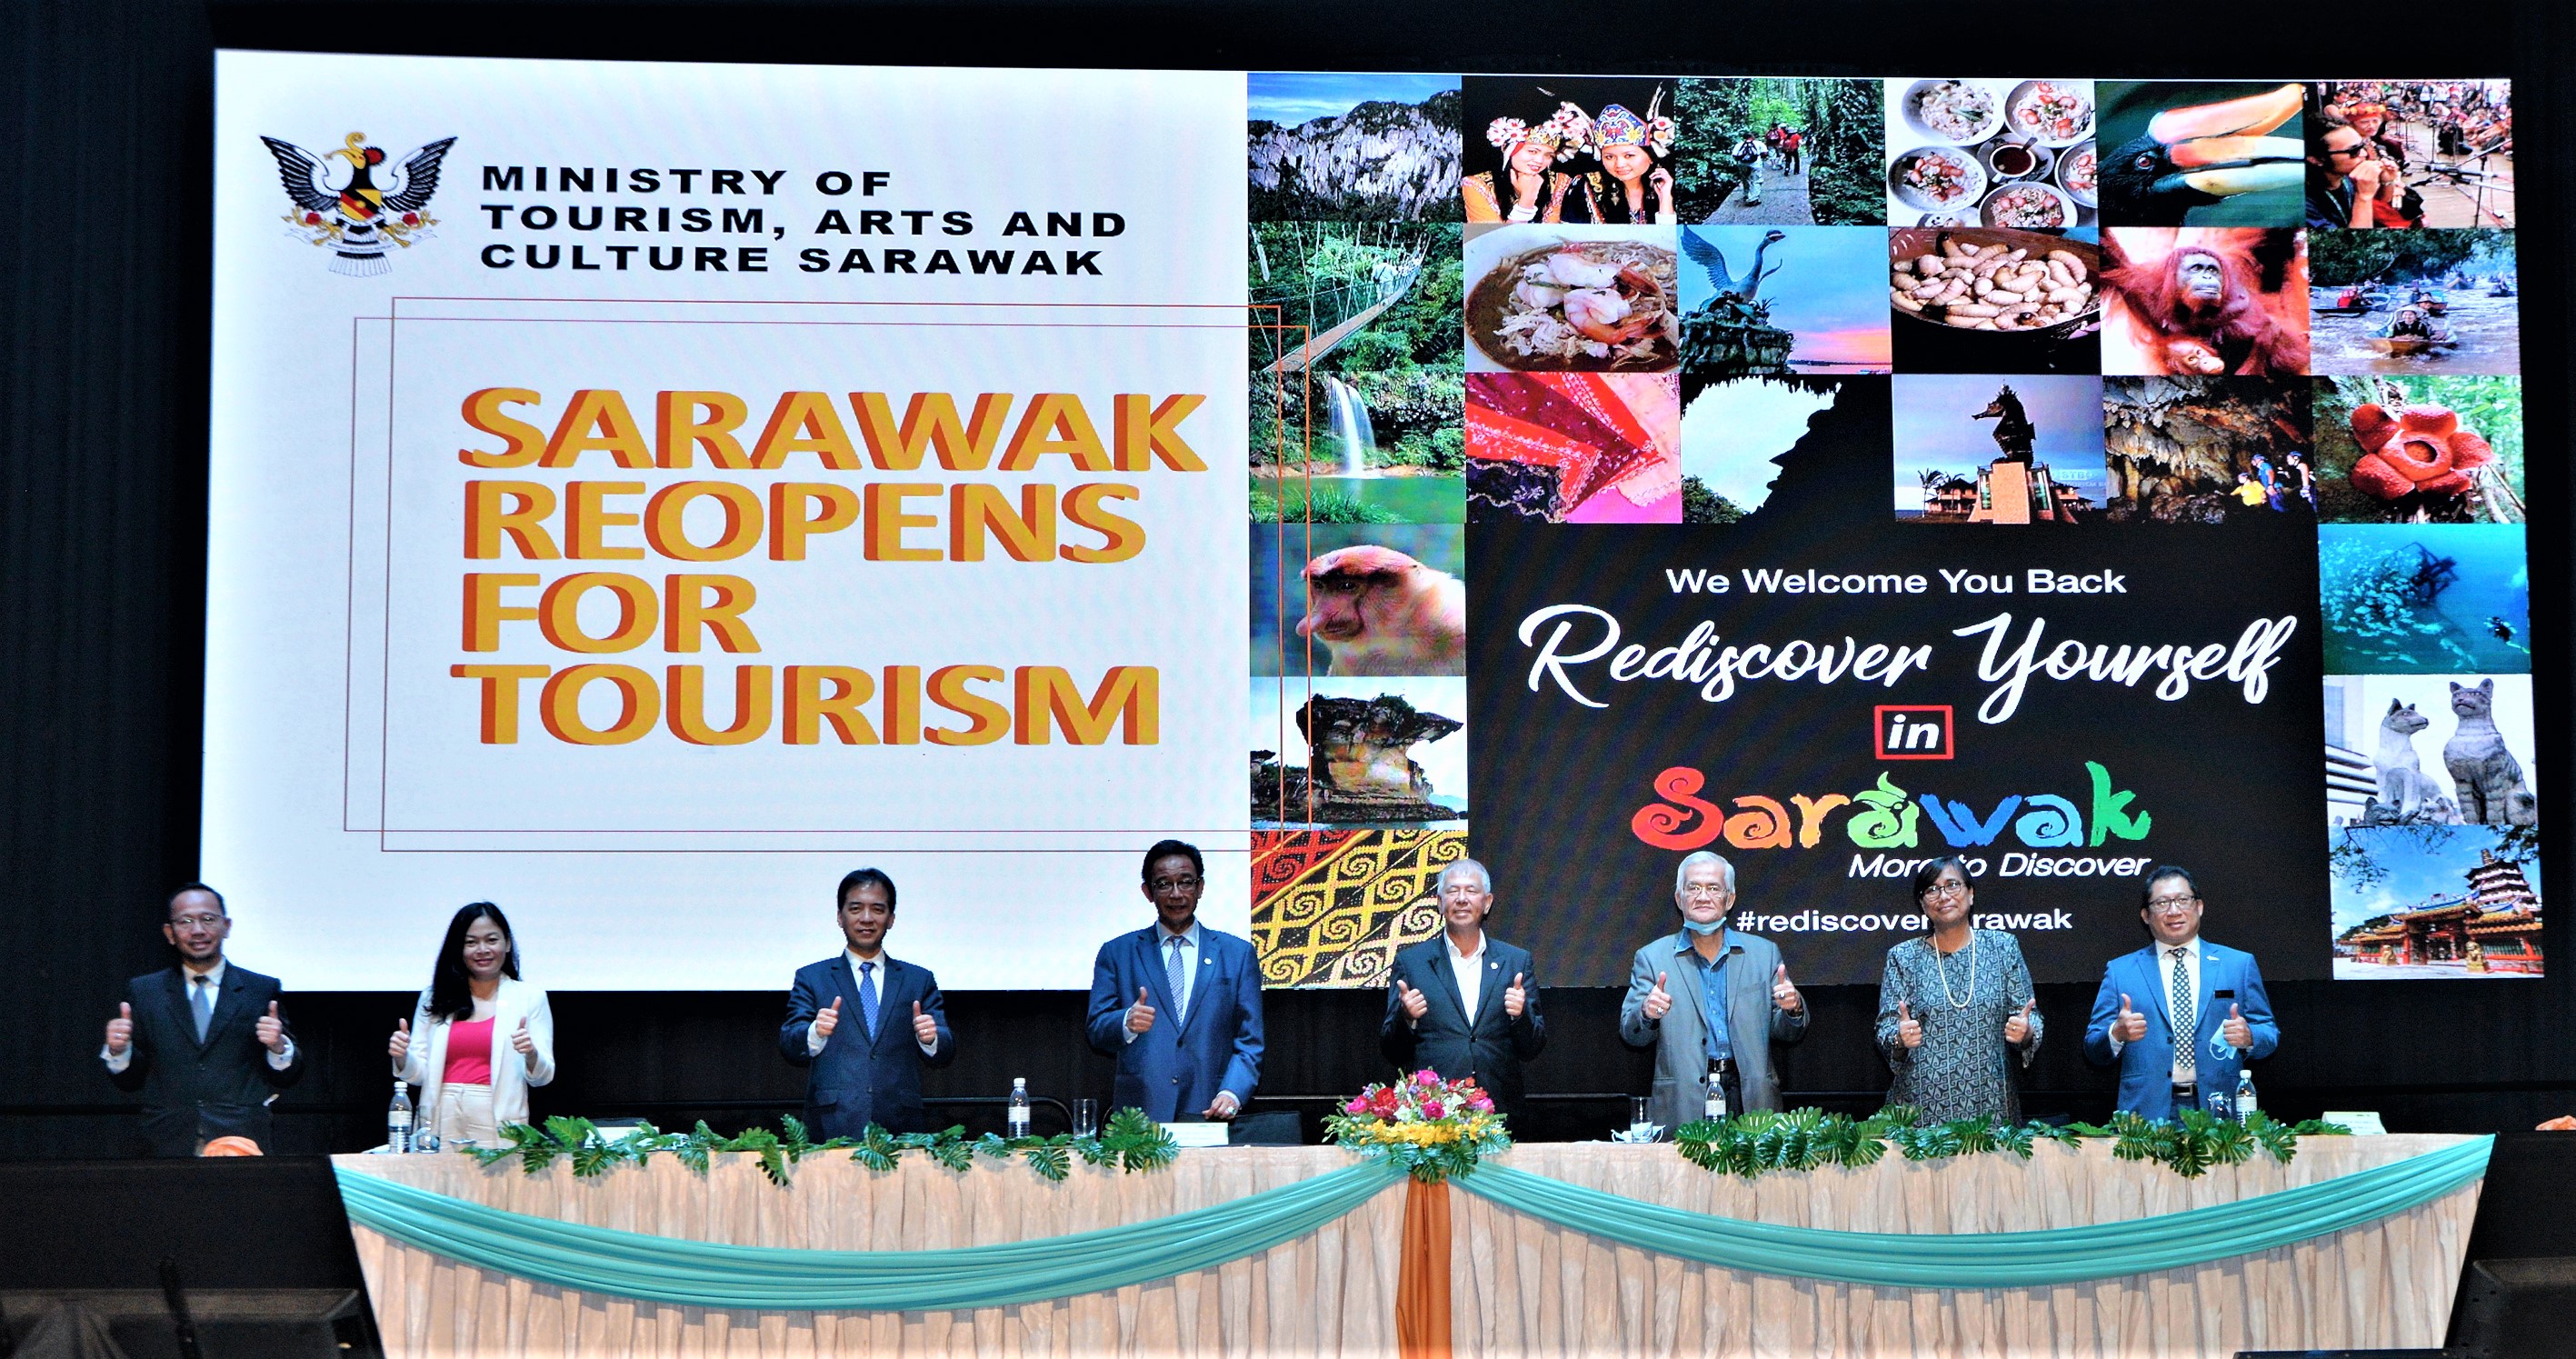 Photo shows the Minister of Tourism, Arts and Culture Sarawak, Datuk Haji Abdul Karim Rahman Hamzah (fourth left) seen with other guests at the launch of the ‘Sarawak Reopens For Tourism’ package at the Borneo Convention Centre Kuching. (Photo by BERNAMA)